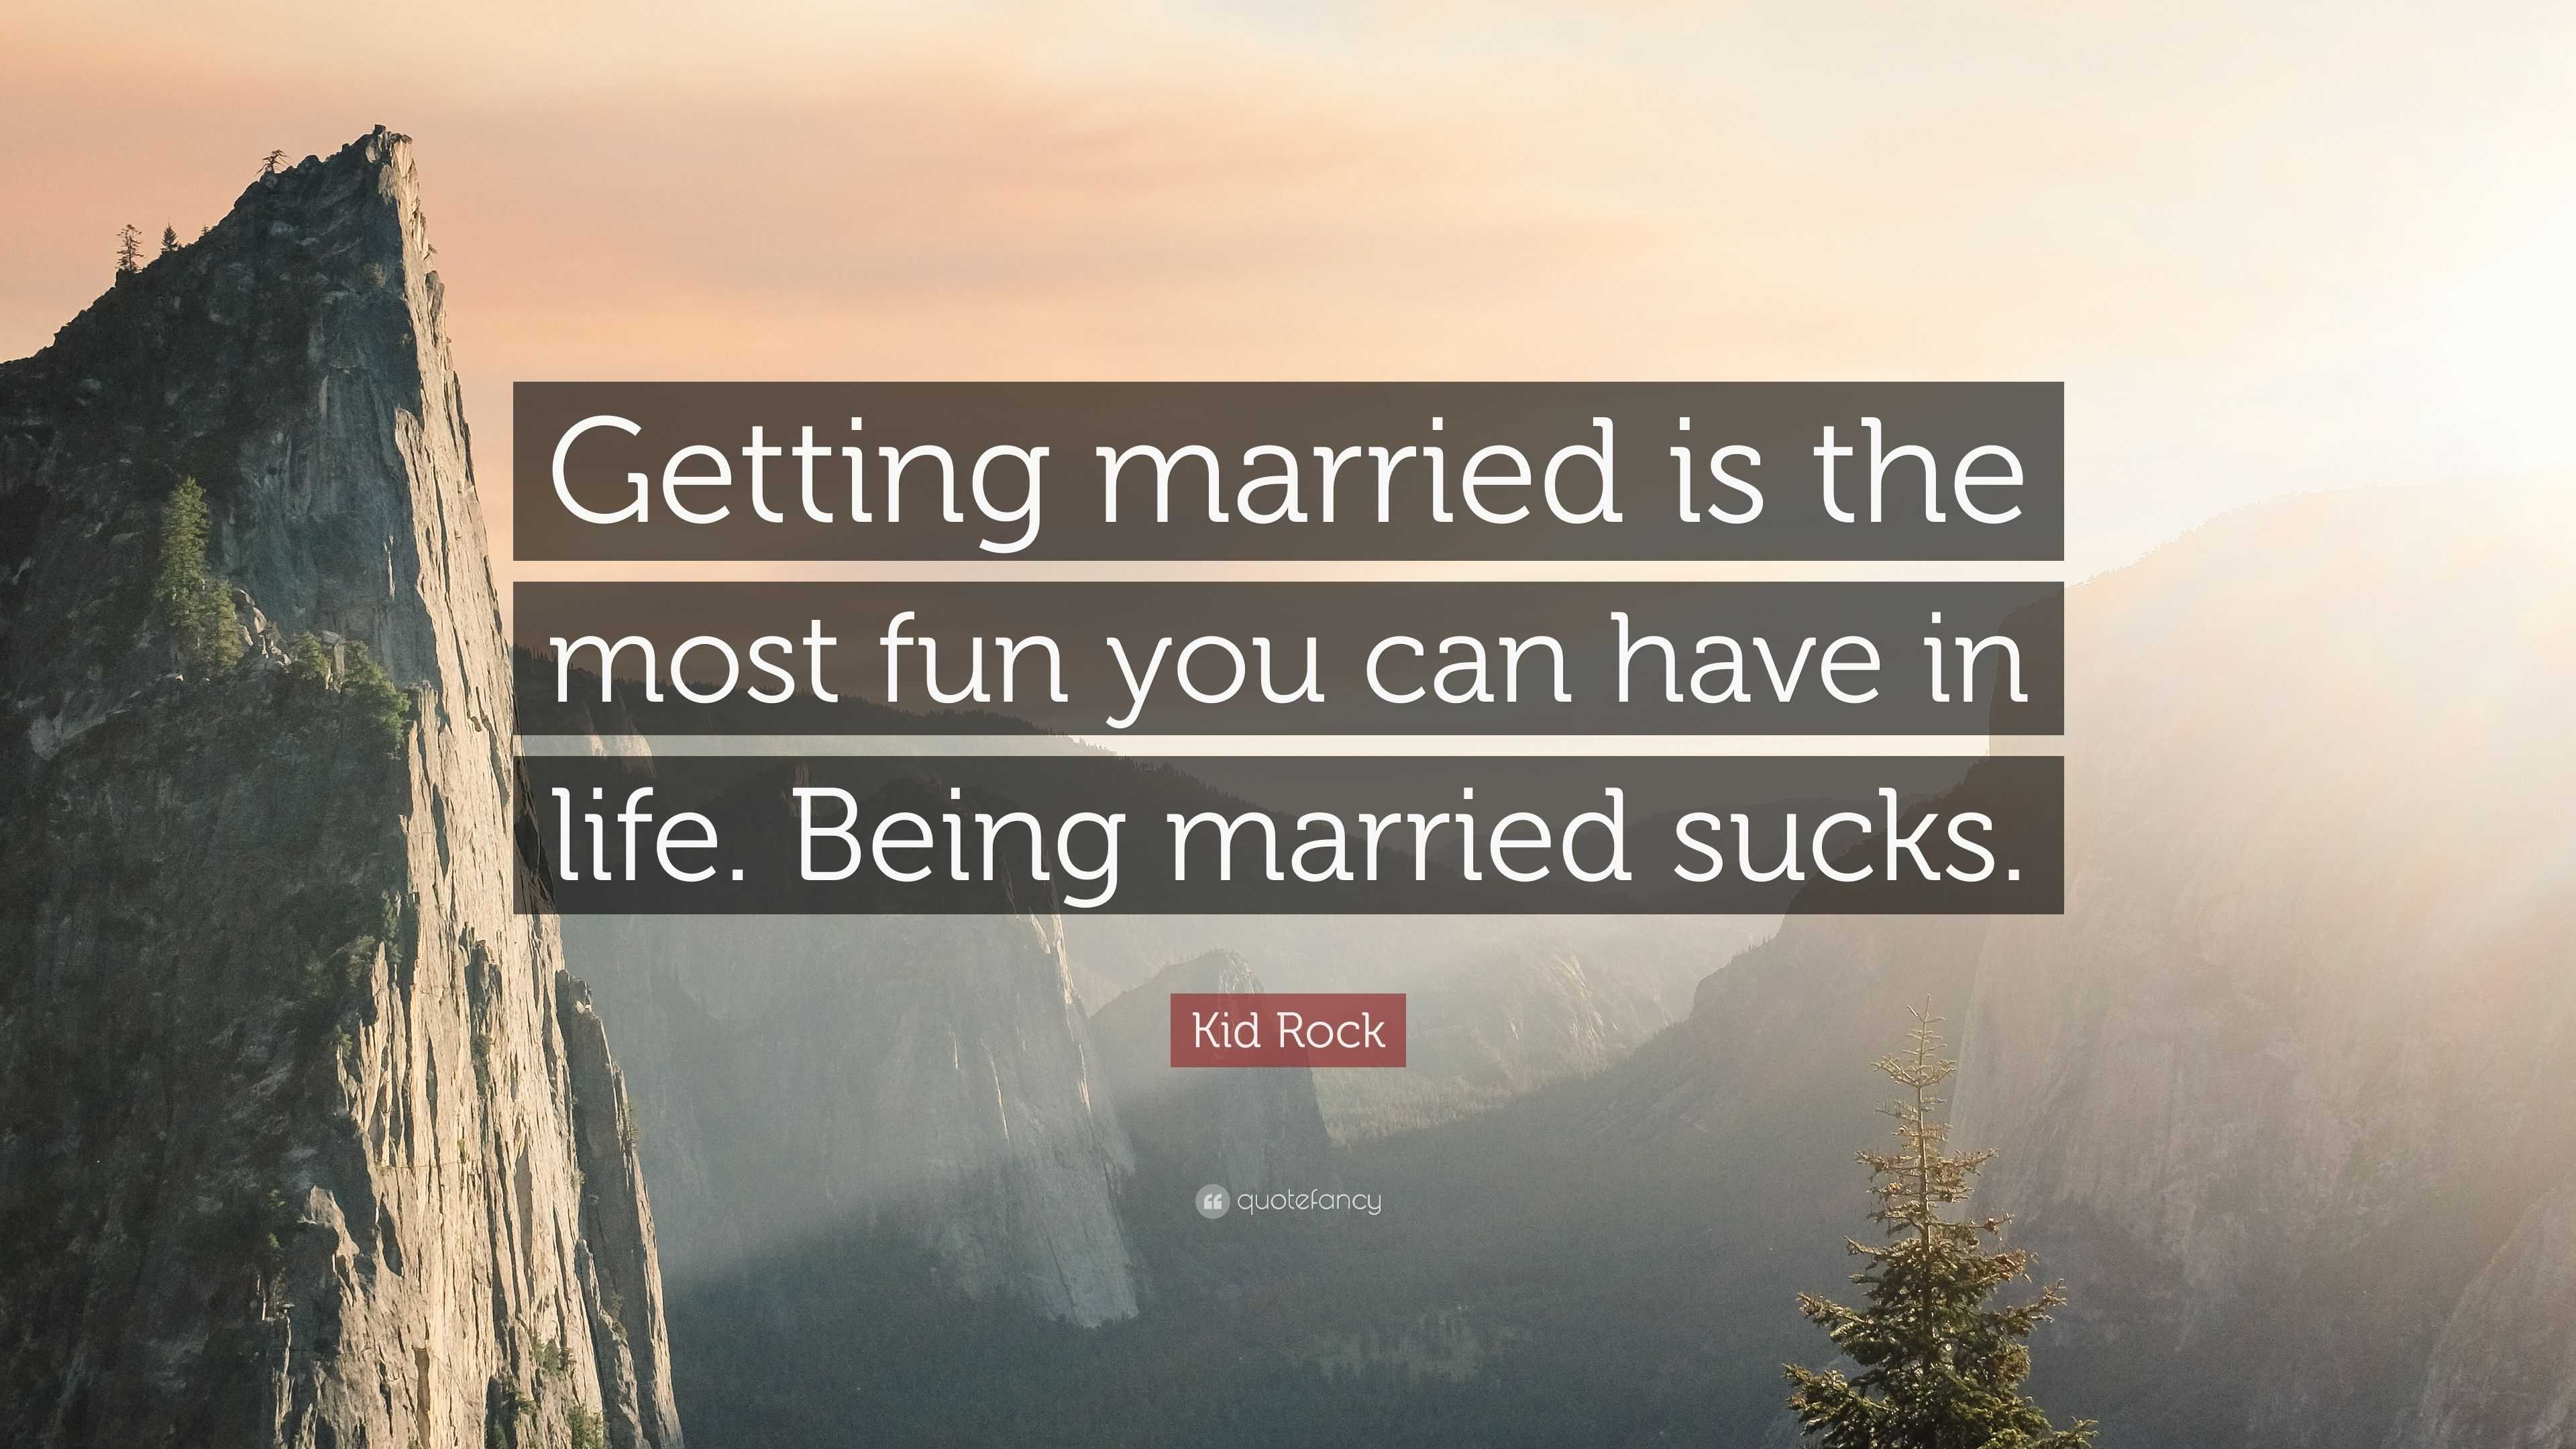 why being married sucks